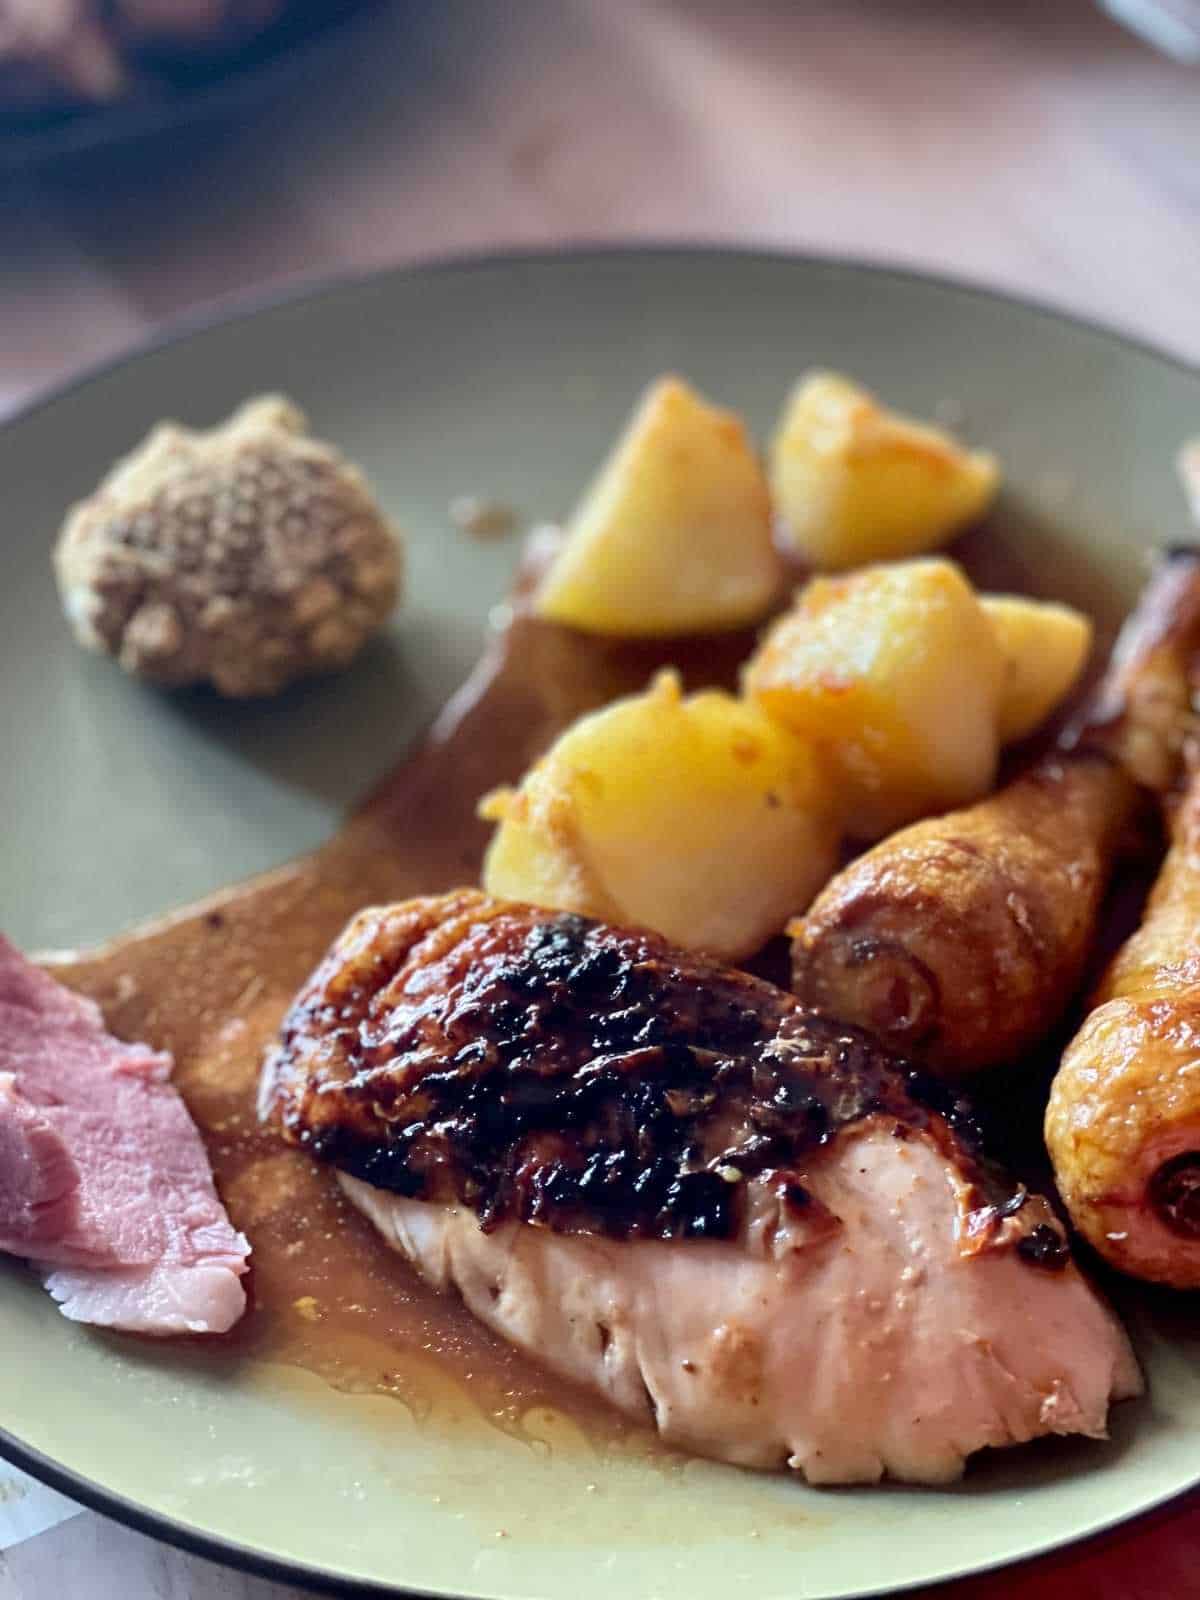 Chicken breast on a green dish with a dark brown or black rim, on the plate there's also the gravy from the air fryer, roast parsnips and potatoes, even a ball of stuffing